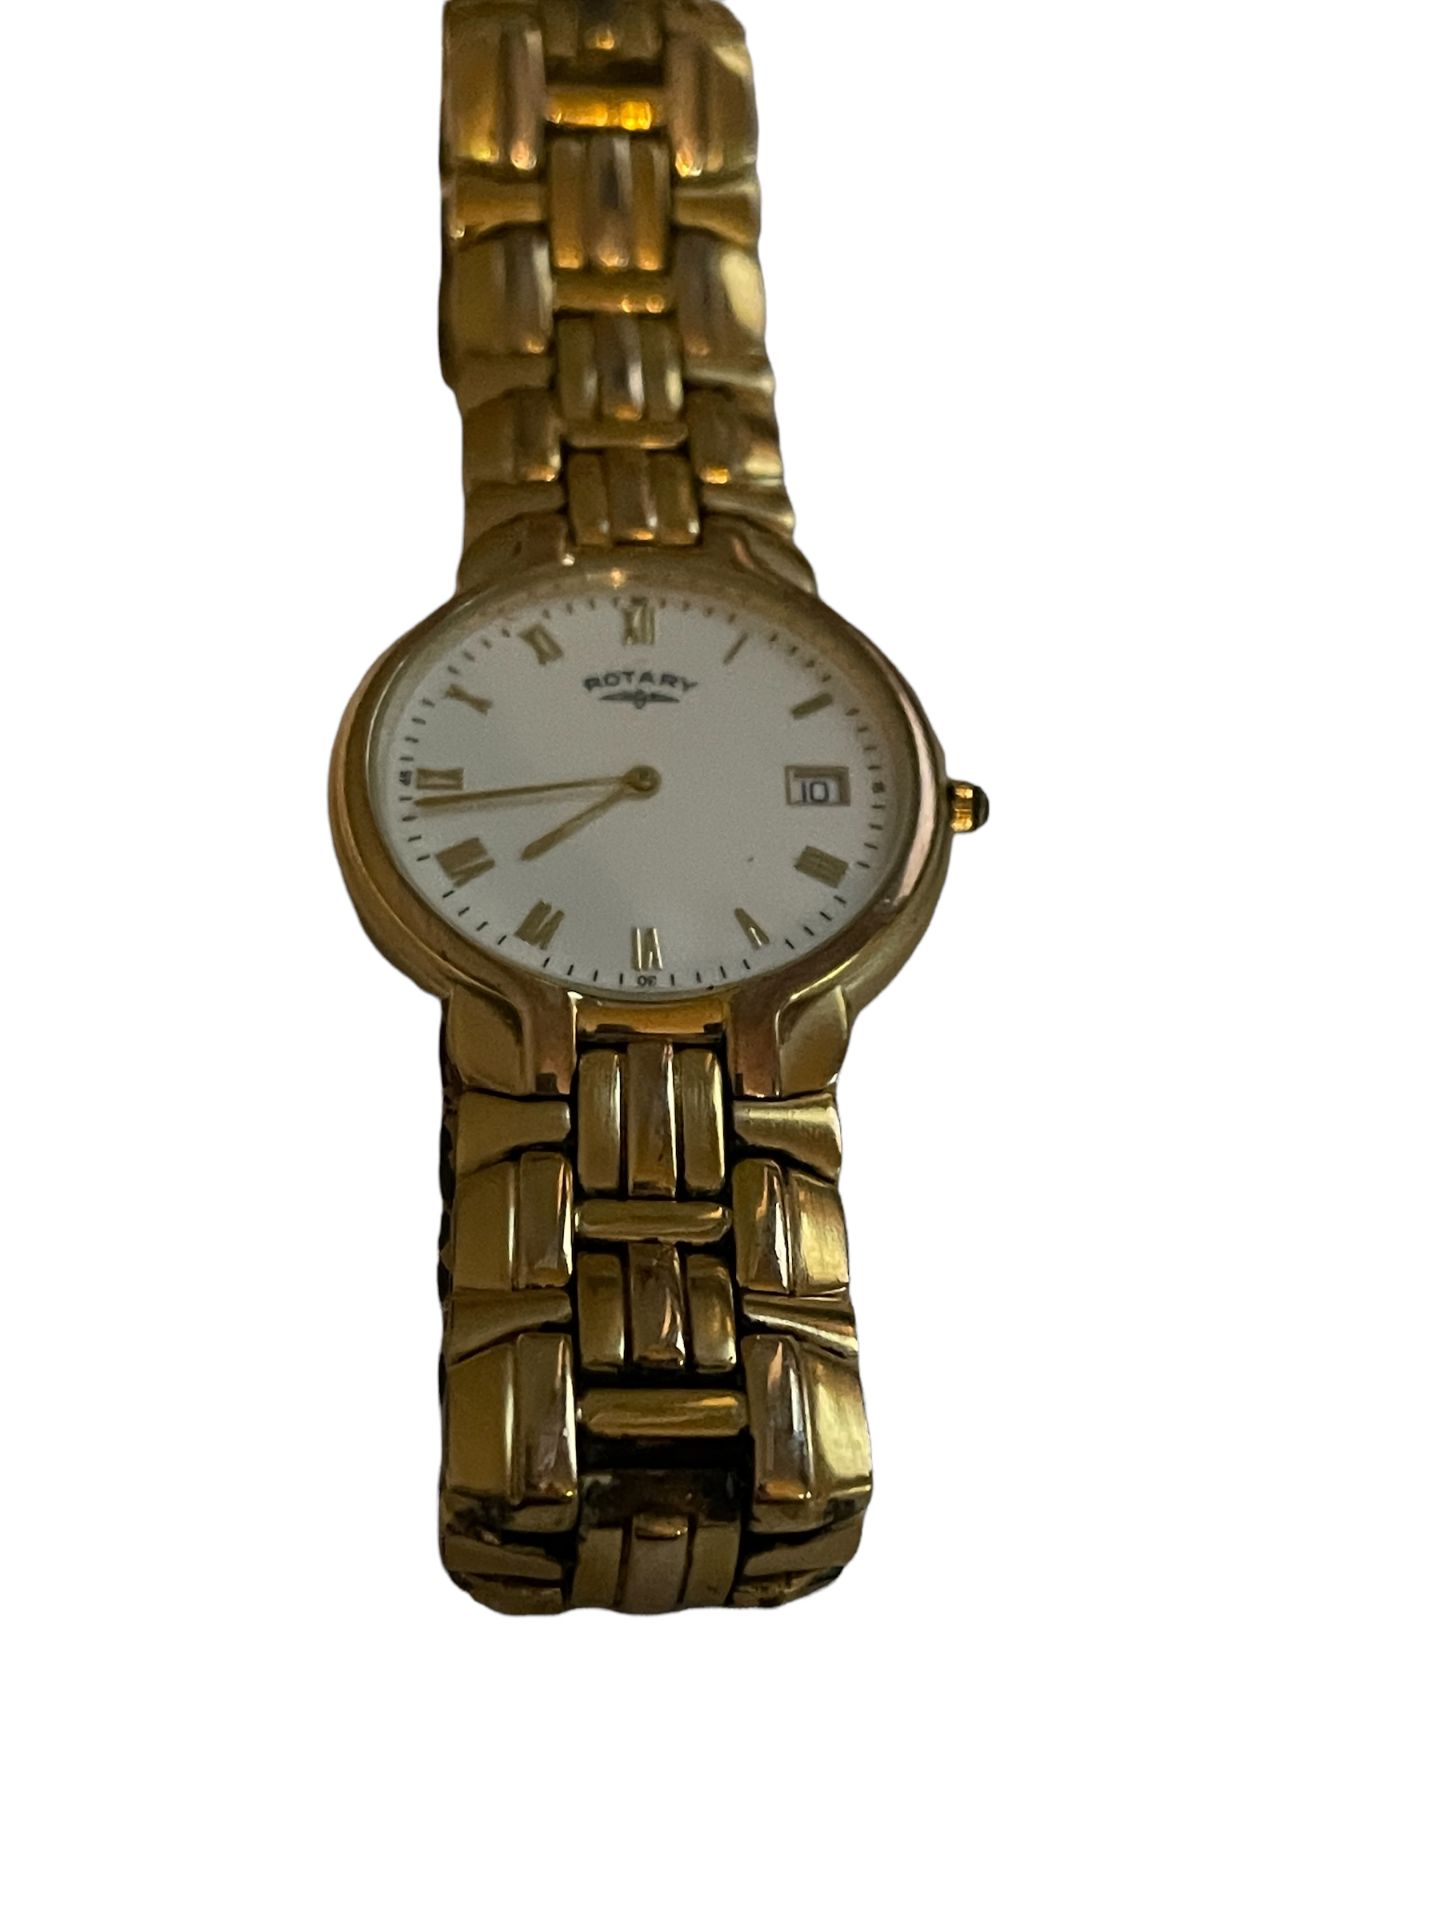 Mens Rotary Gold Plated Watch - Return Stock from our Private Jet Charter - Image 14 of 14